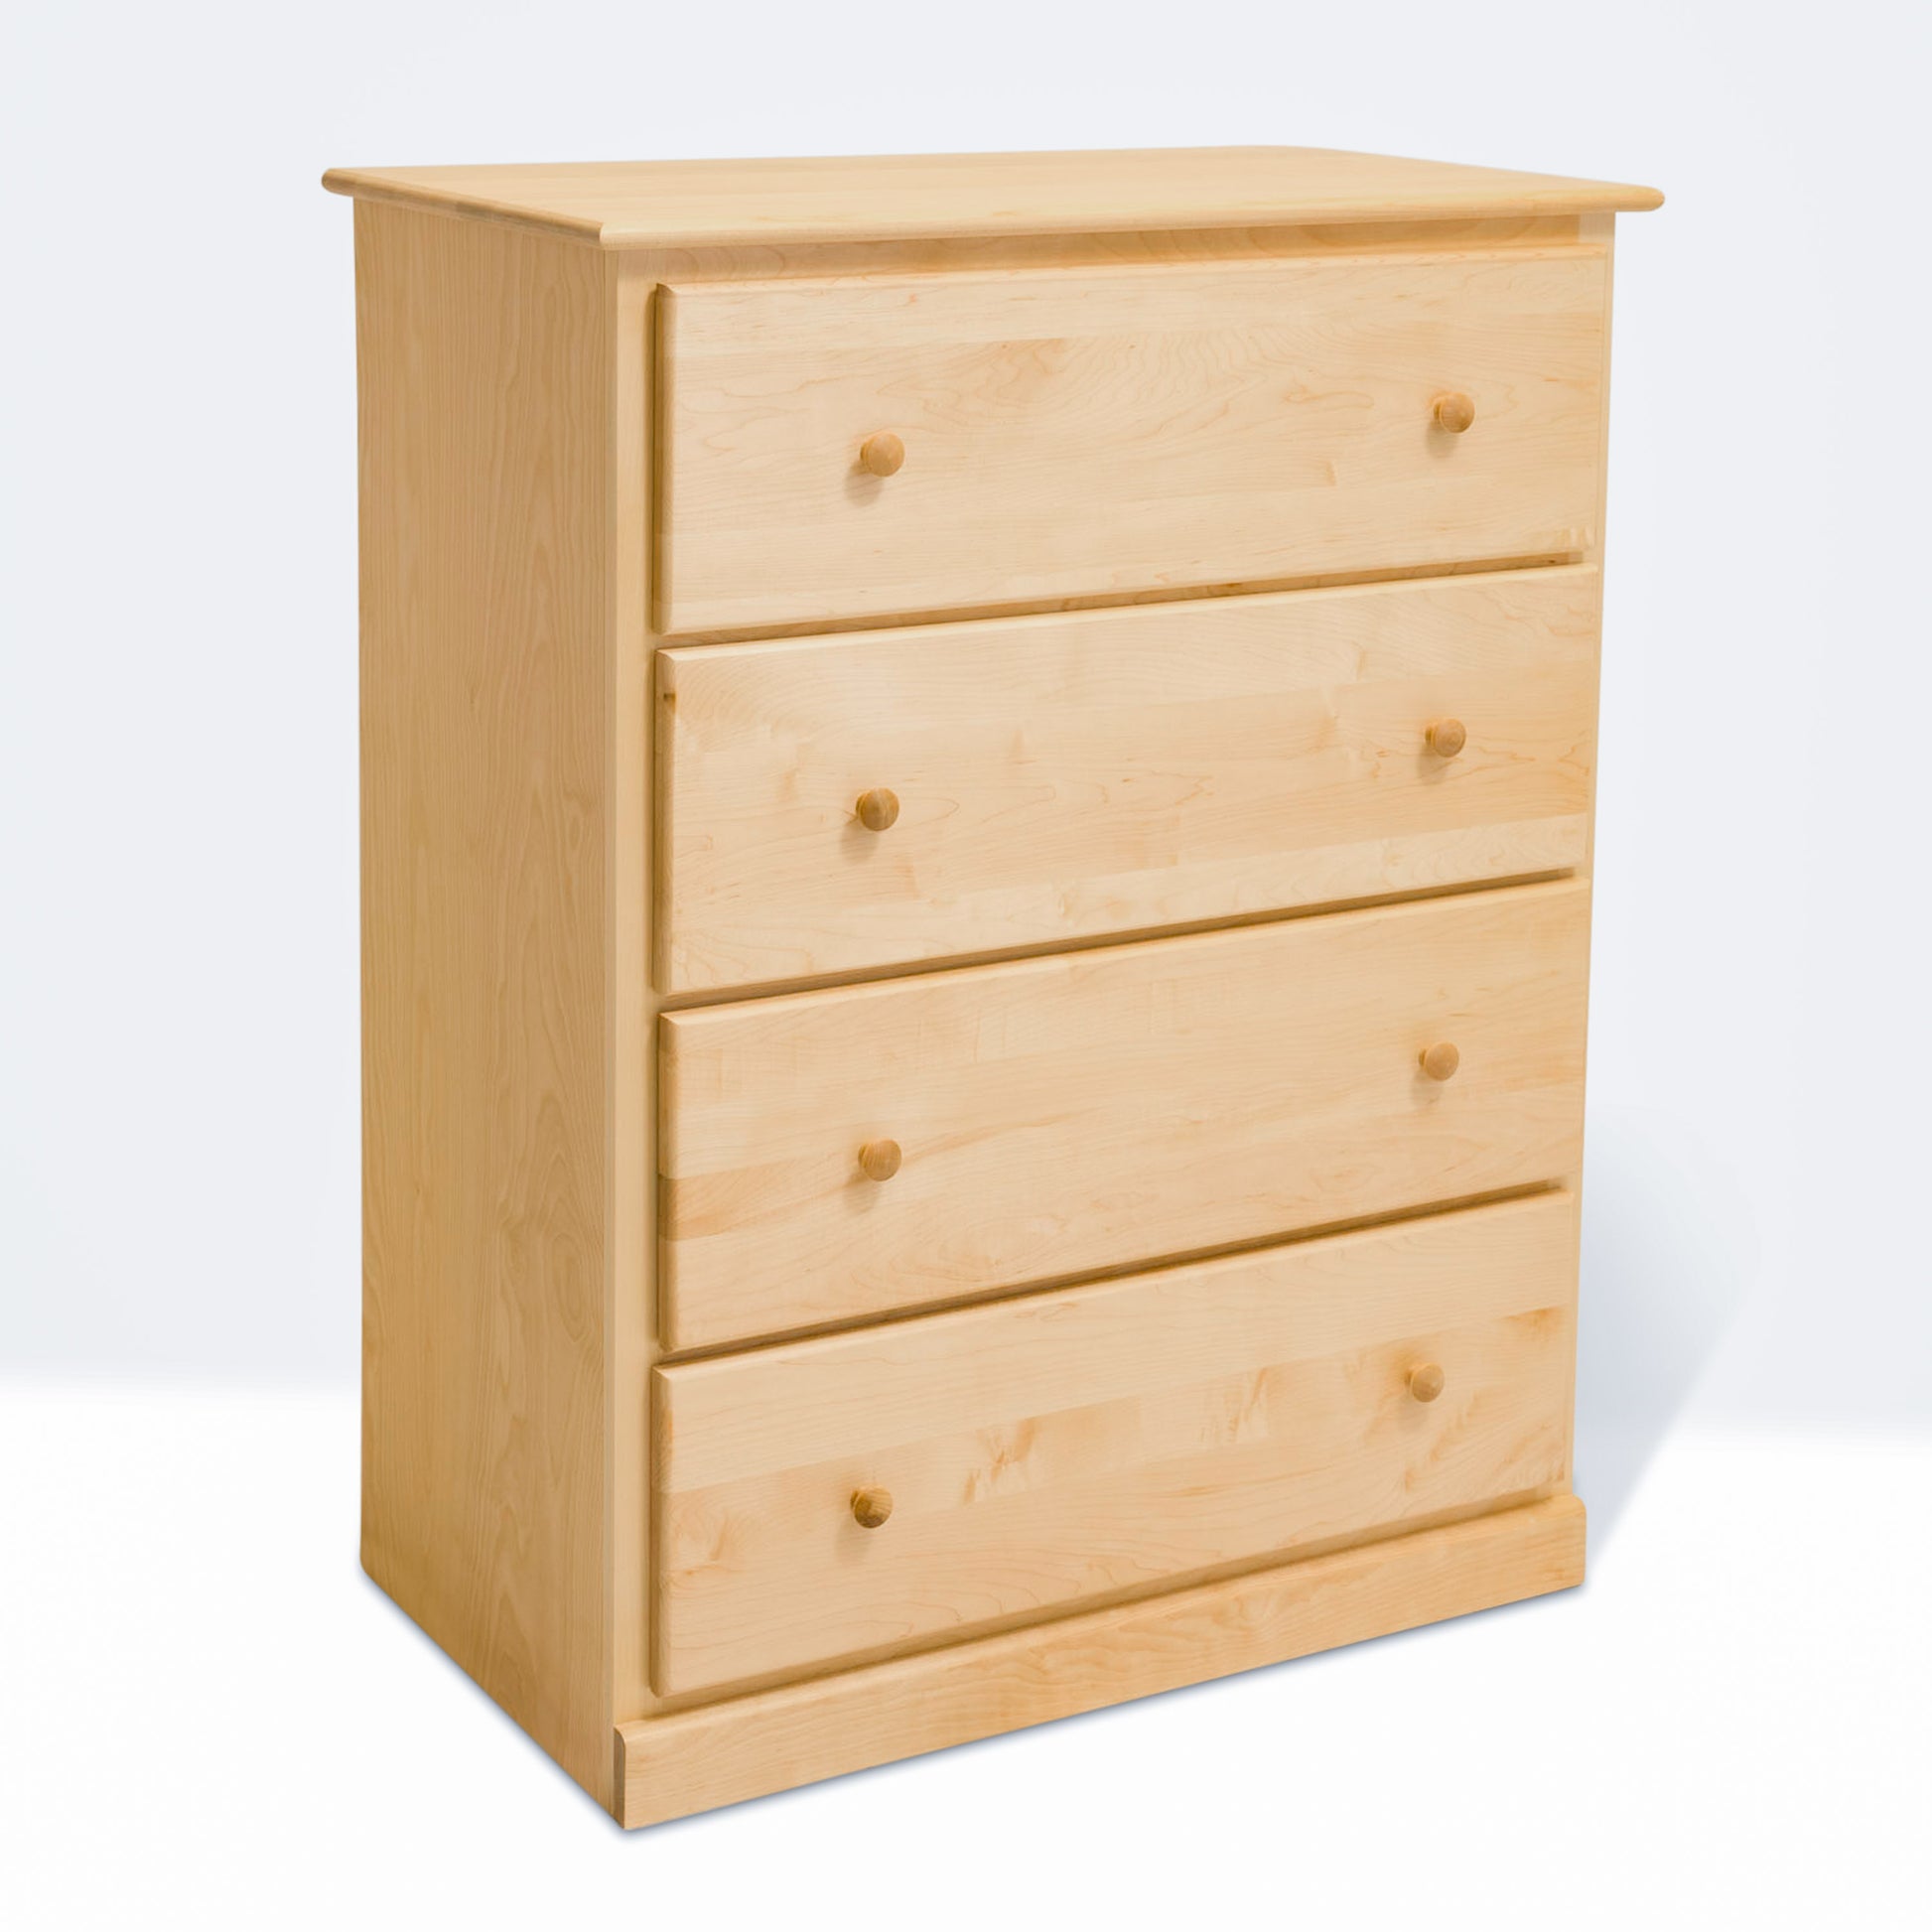 Acadia Cottage Chest: 4 drawers, rustic charm, natural finish. Pictured from a front side angle.